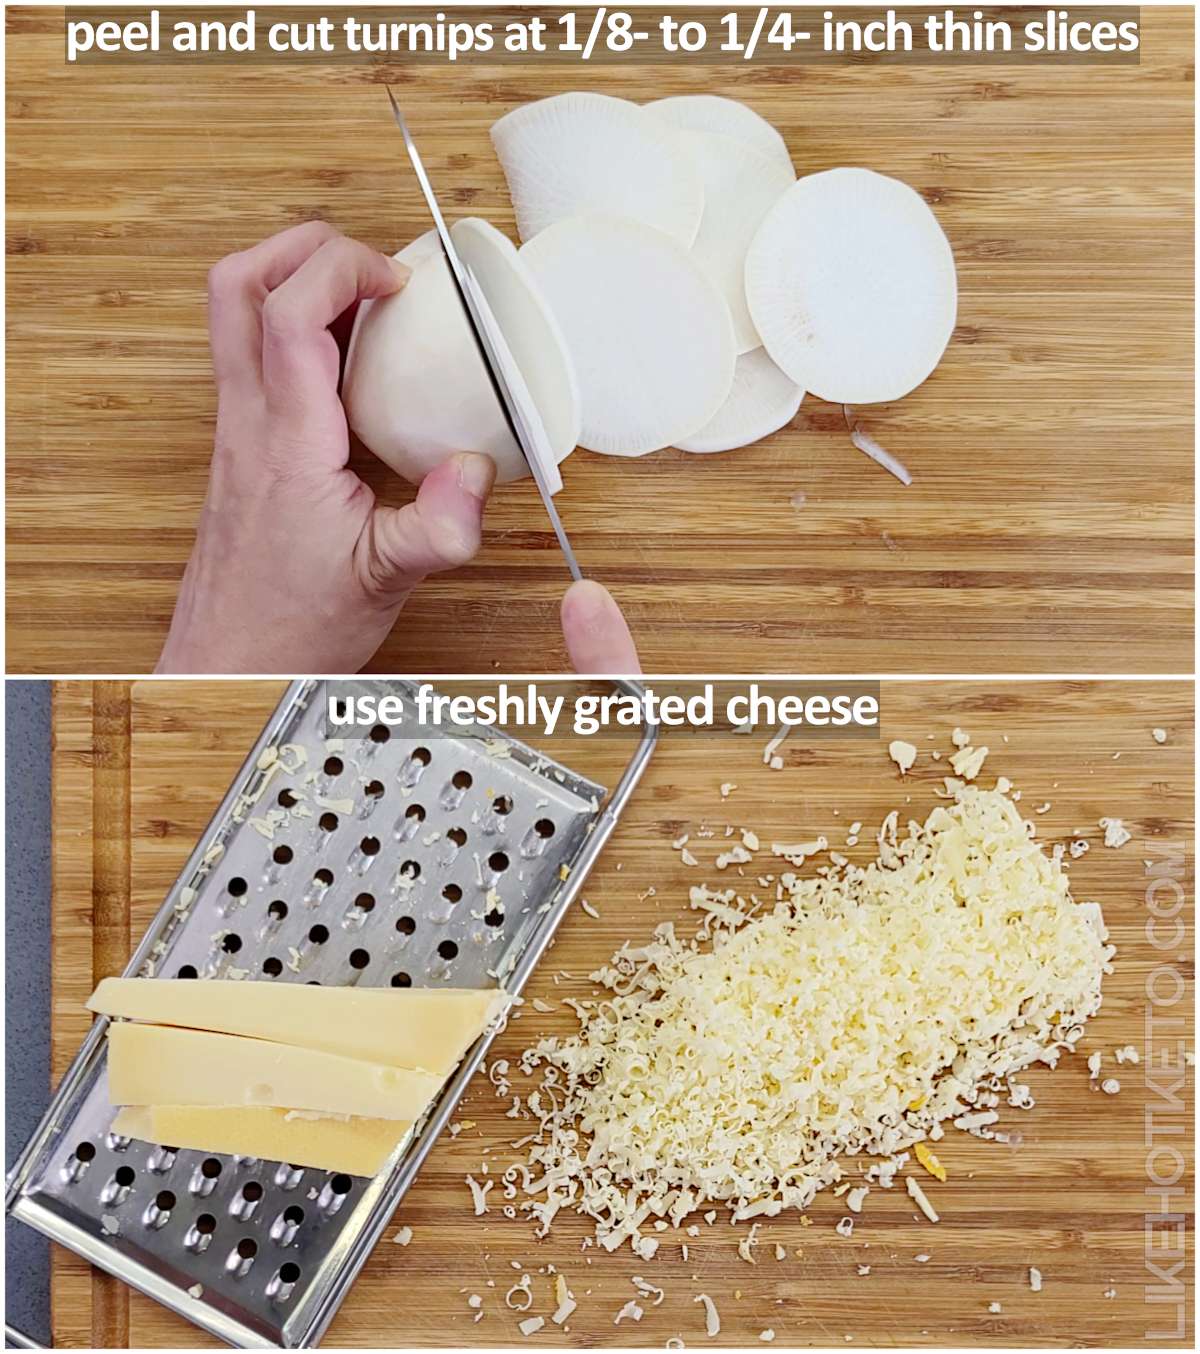 Cutting the thin turnip slices with a knife, and the freshly grated cheese.